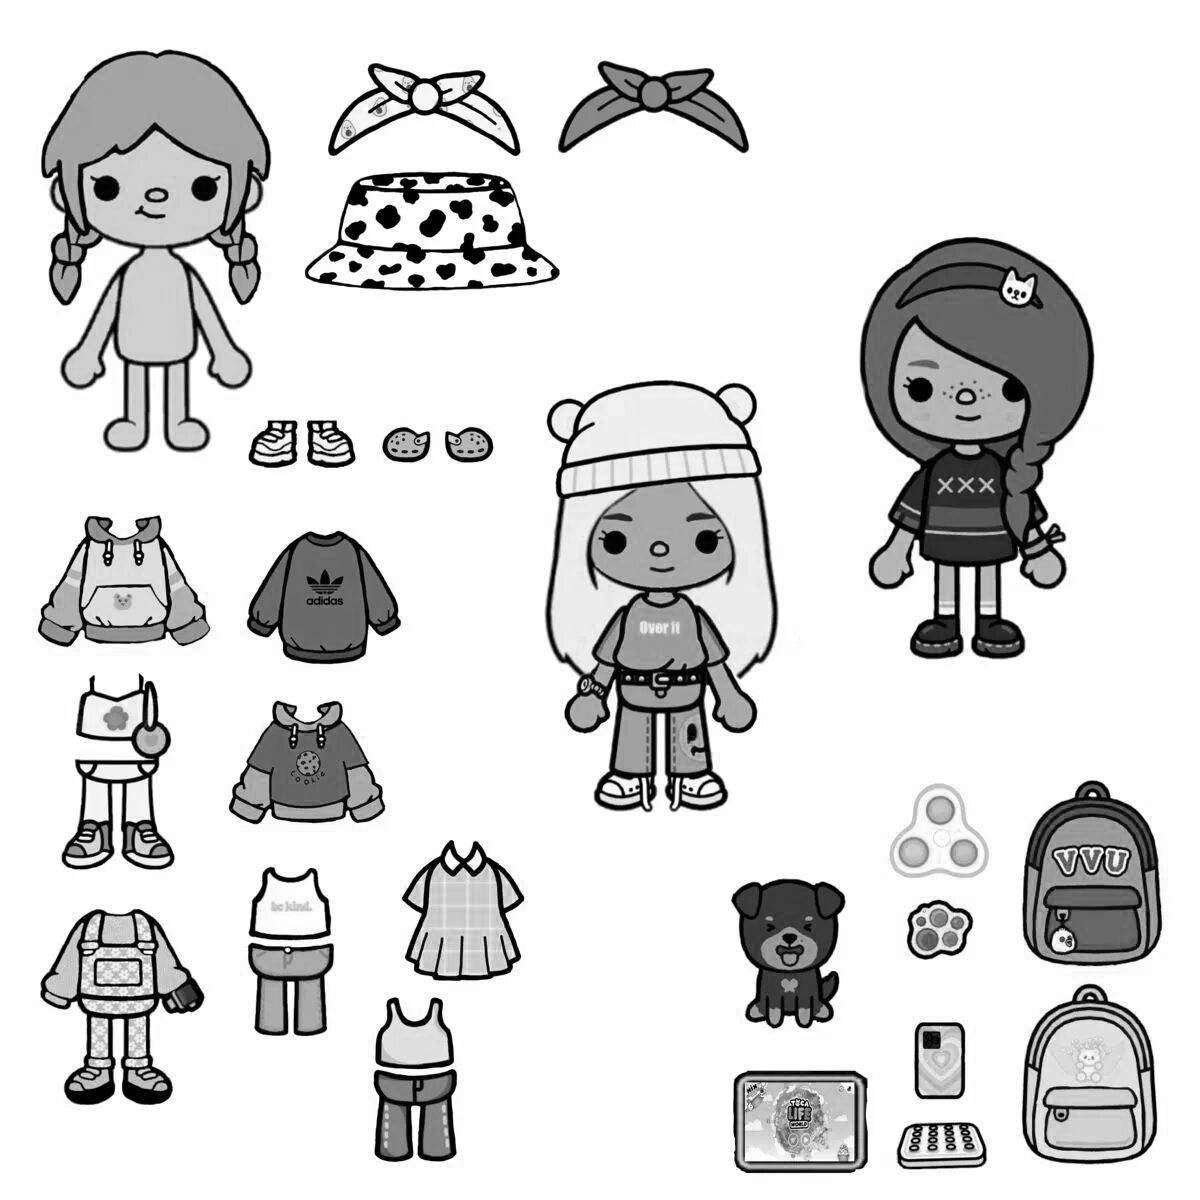 Characters for paper house #1